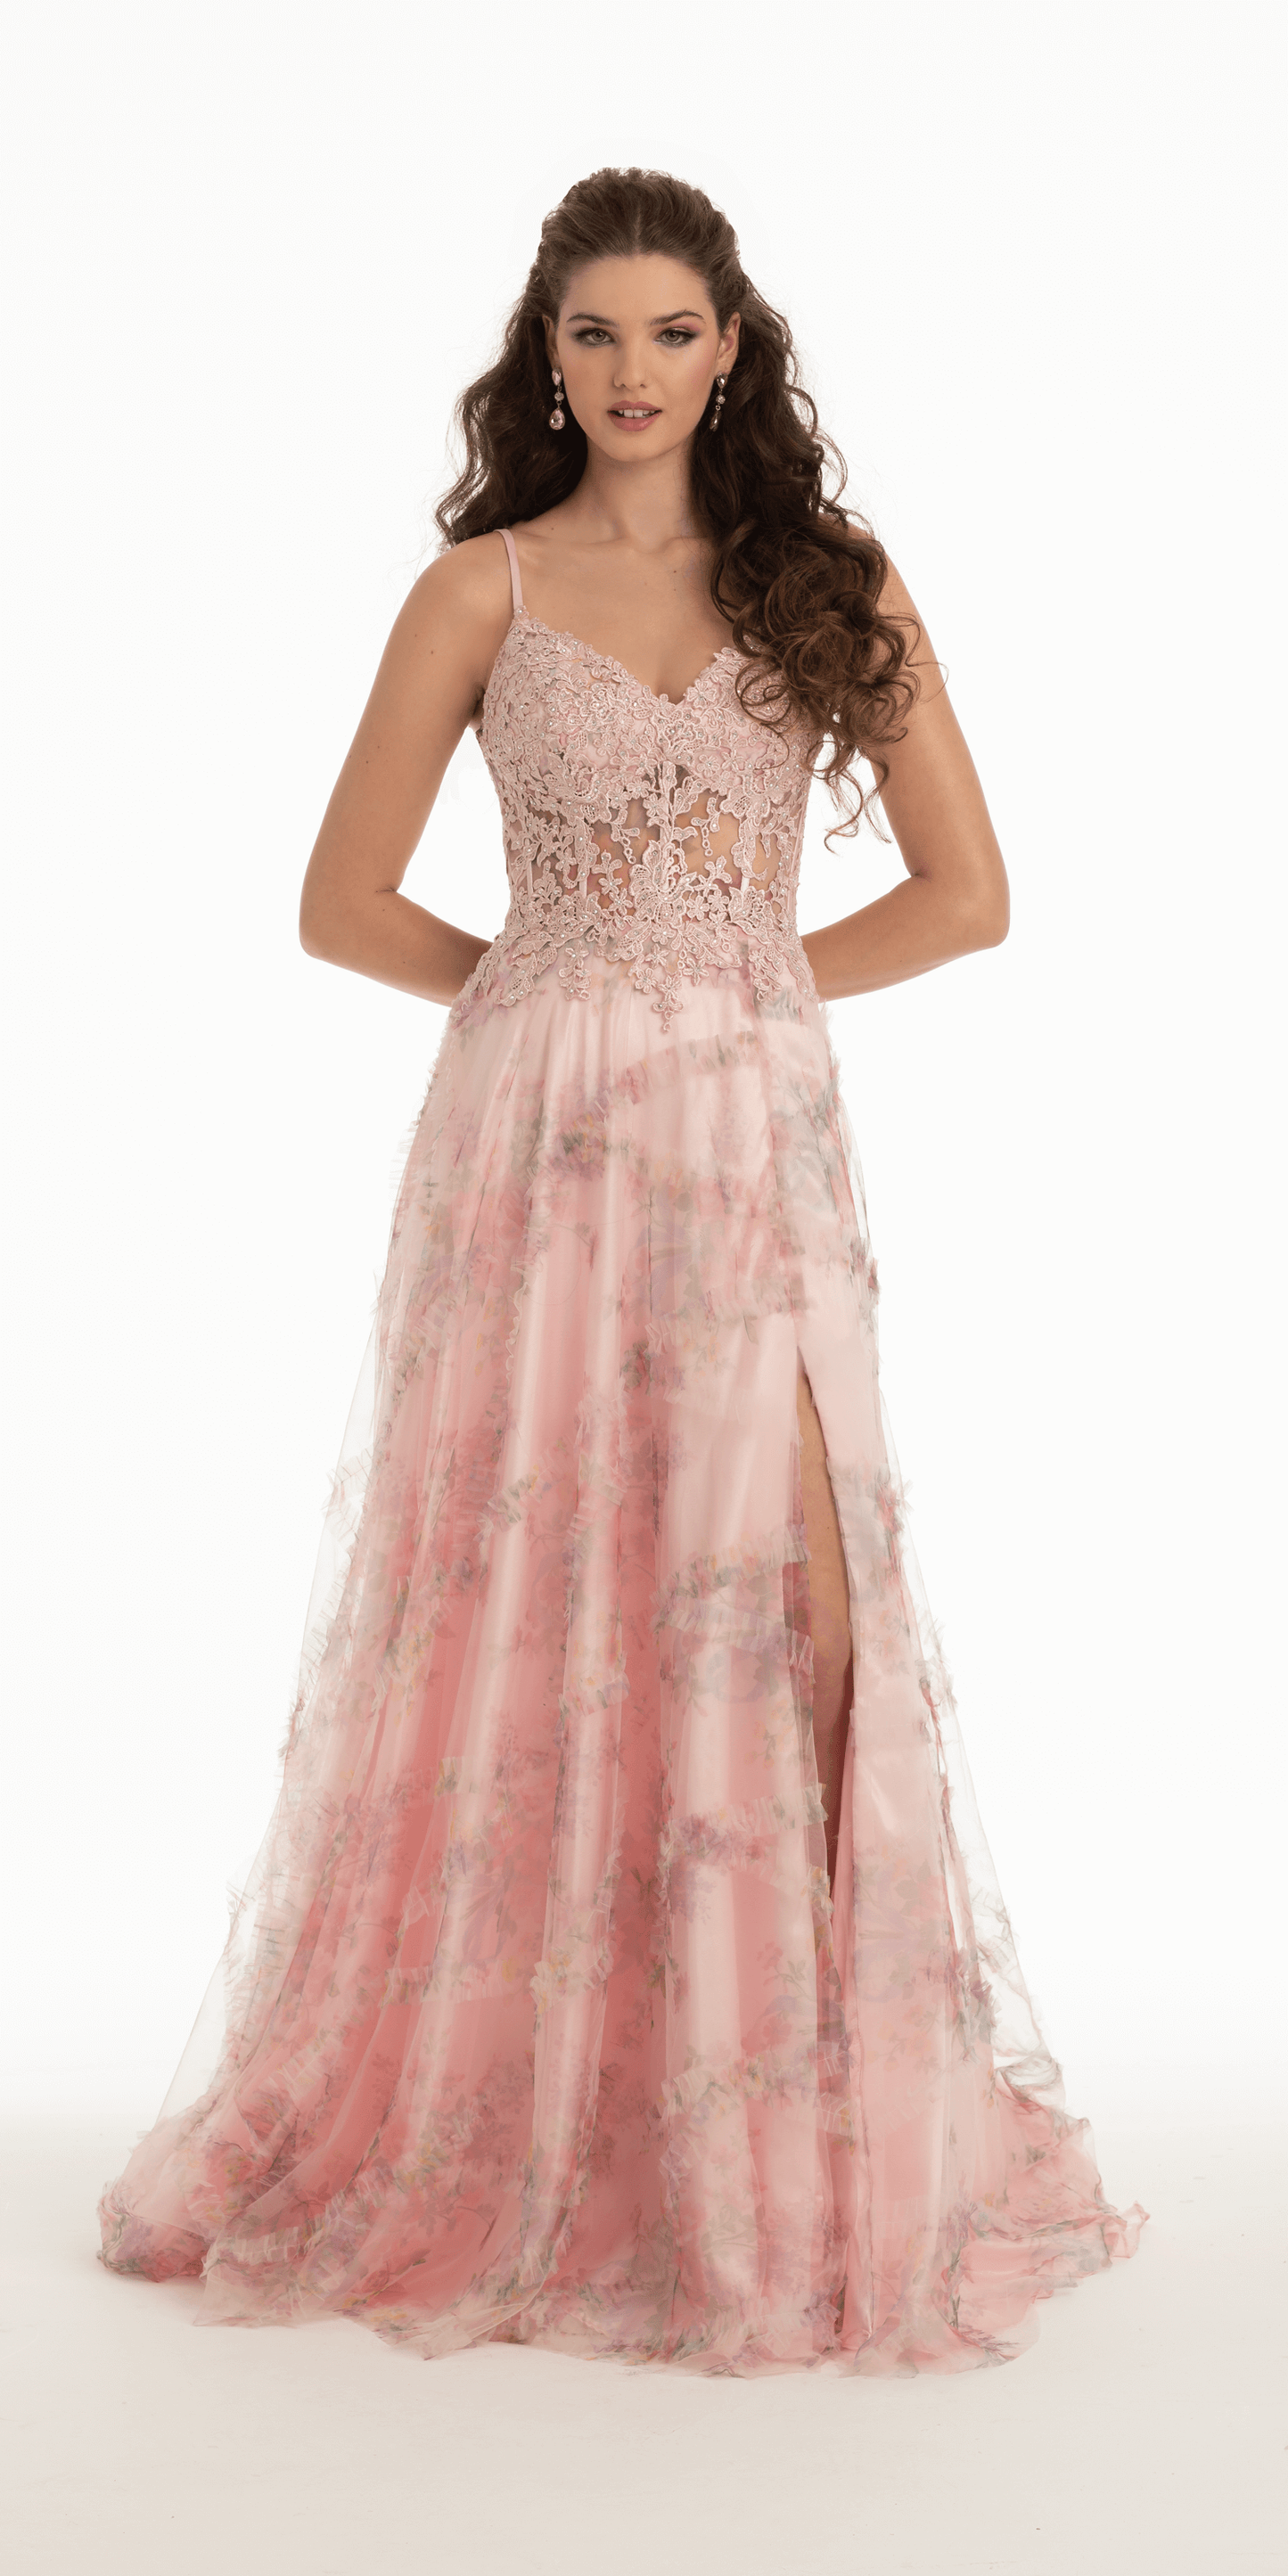 Camille La Vie Sweetheart Embroidered Tulle Print A Line Dress with Keyhole Back missy / 00 / pink